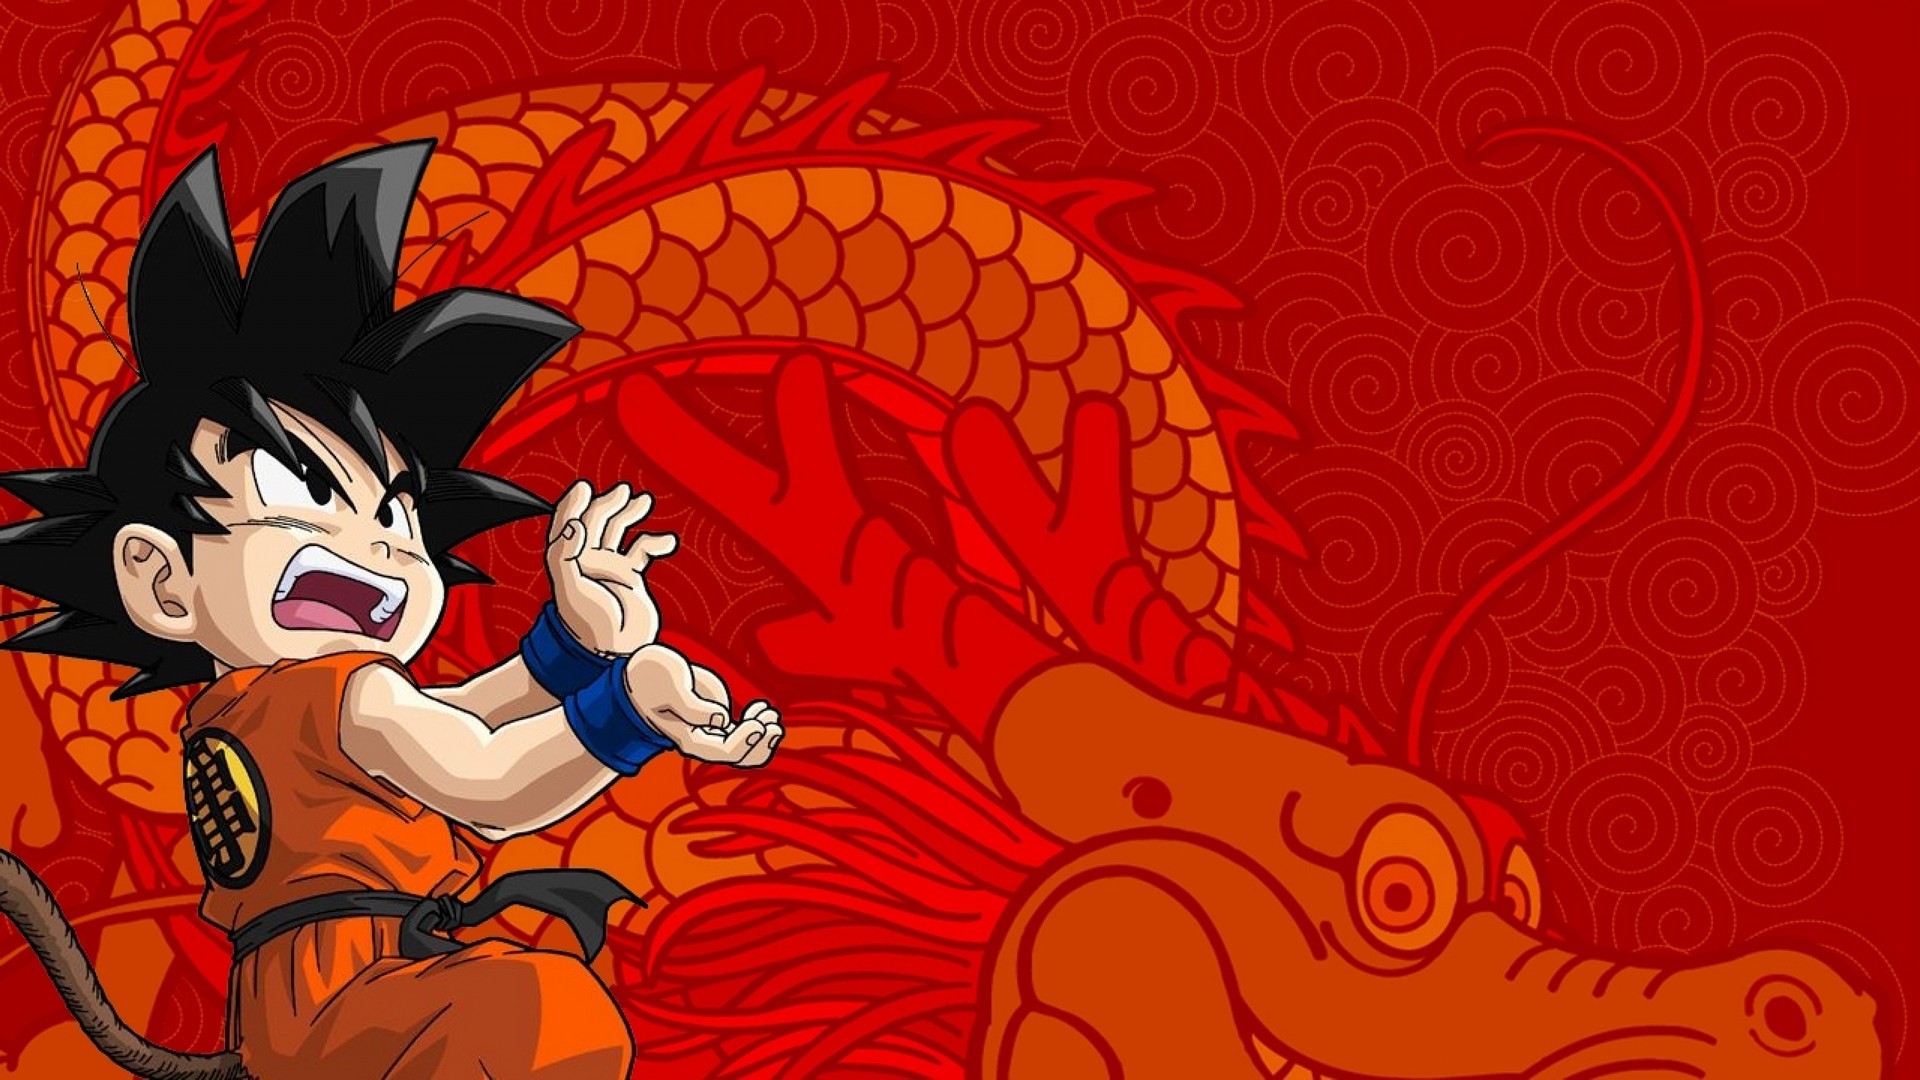 Wallpapers Kid Goku with image resolution 1920x1080 pixel. You can make this wallpaper for your Desktop Computer Backgrounds, Mac Wallpapers, Android Lock screen or iPhone Screensavers